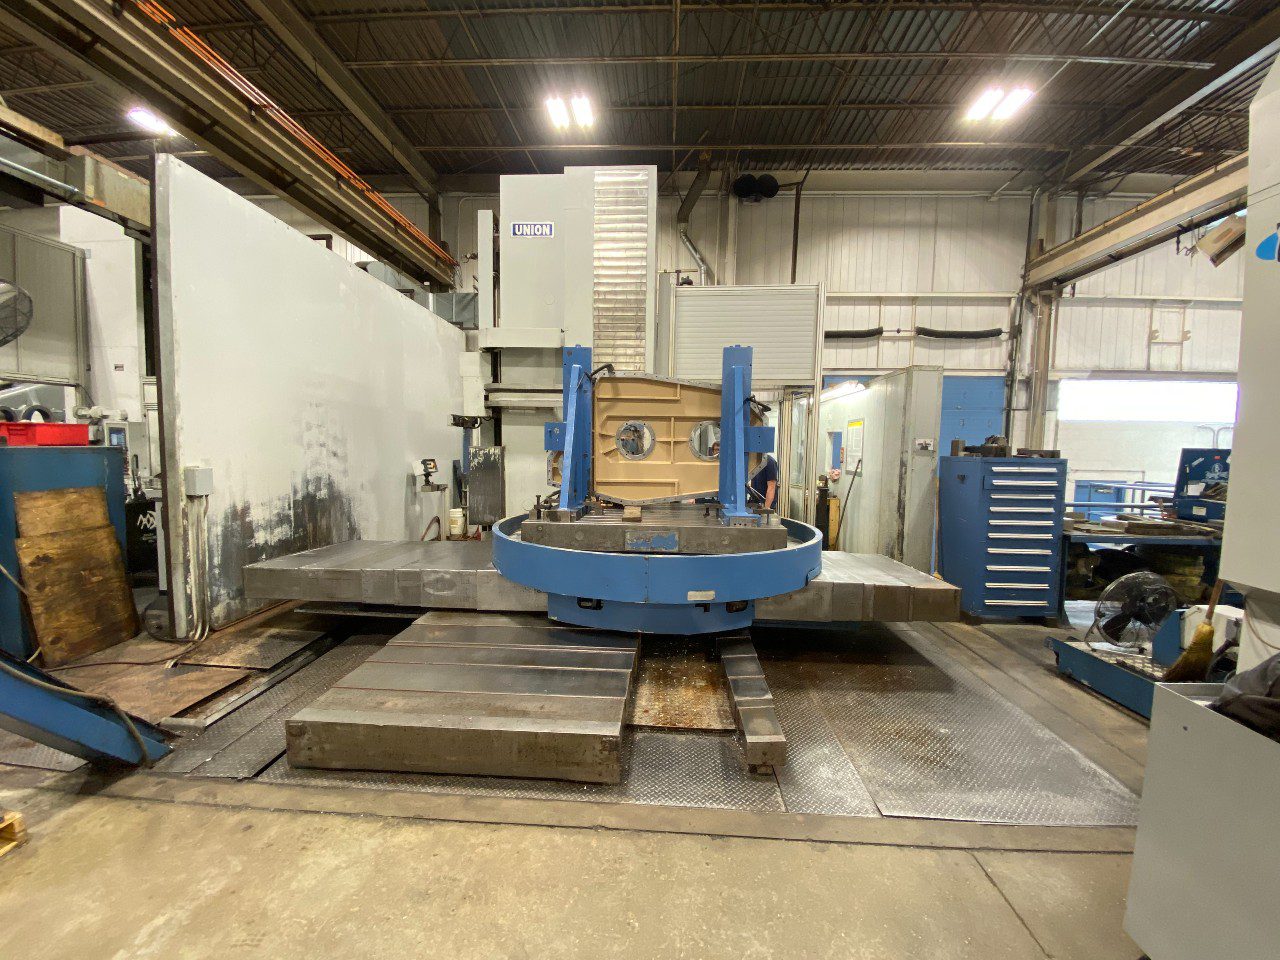 2001 5" Union CNC Horizontal Boring Mill Model TC 130 (Installed new in 2001)